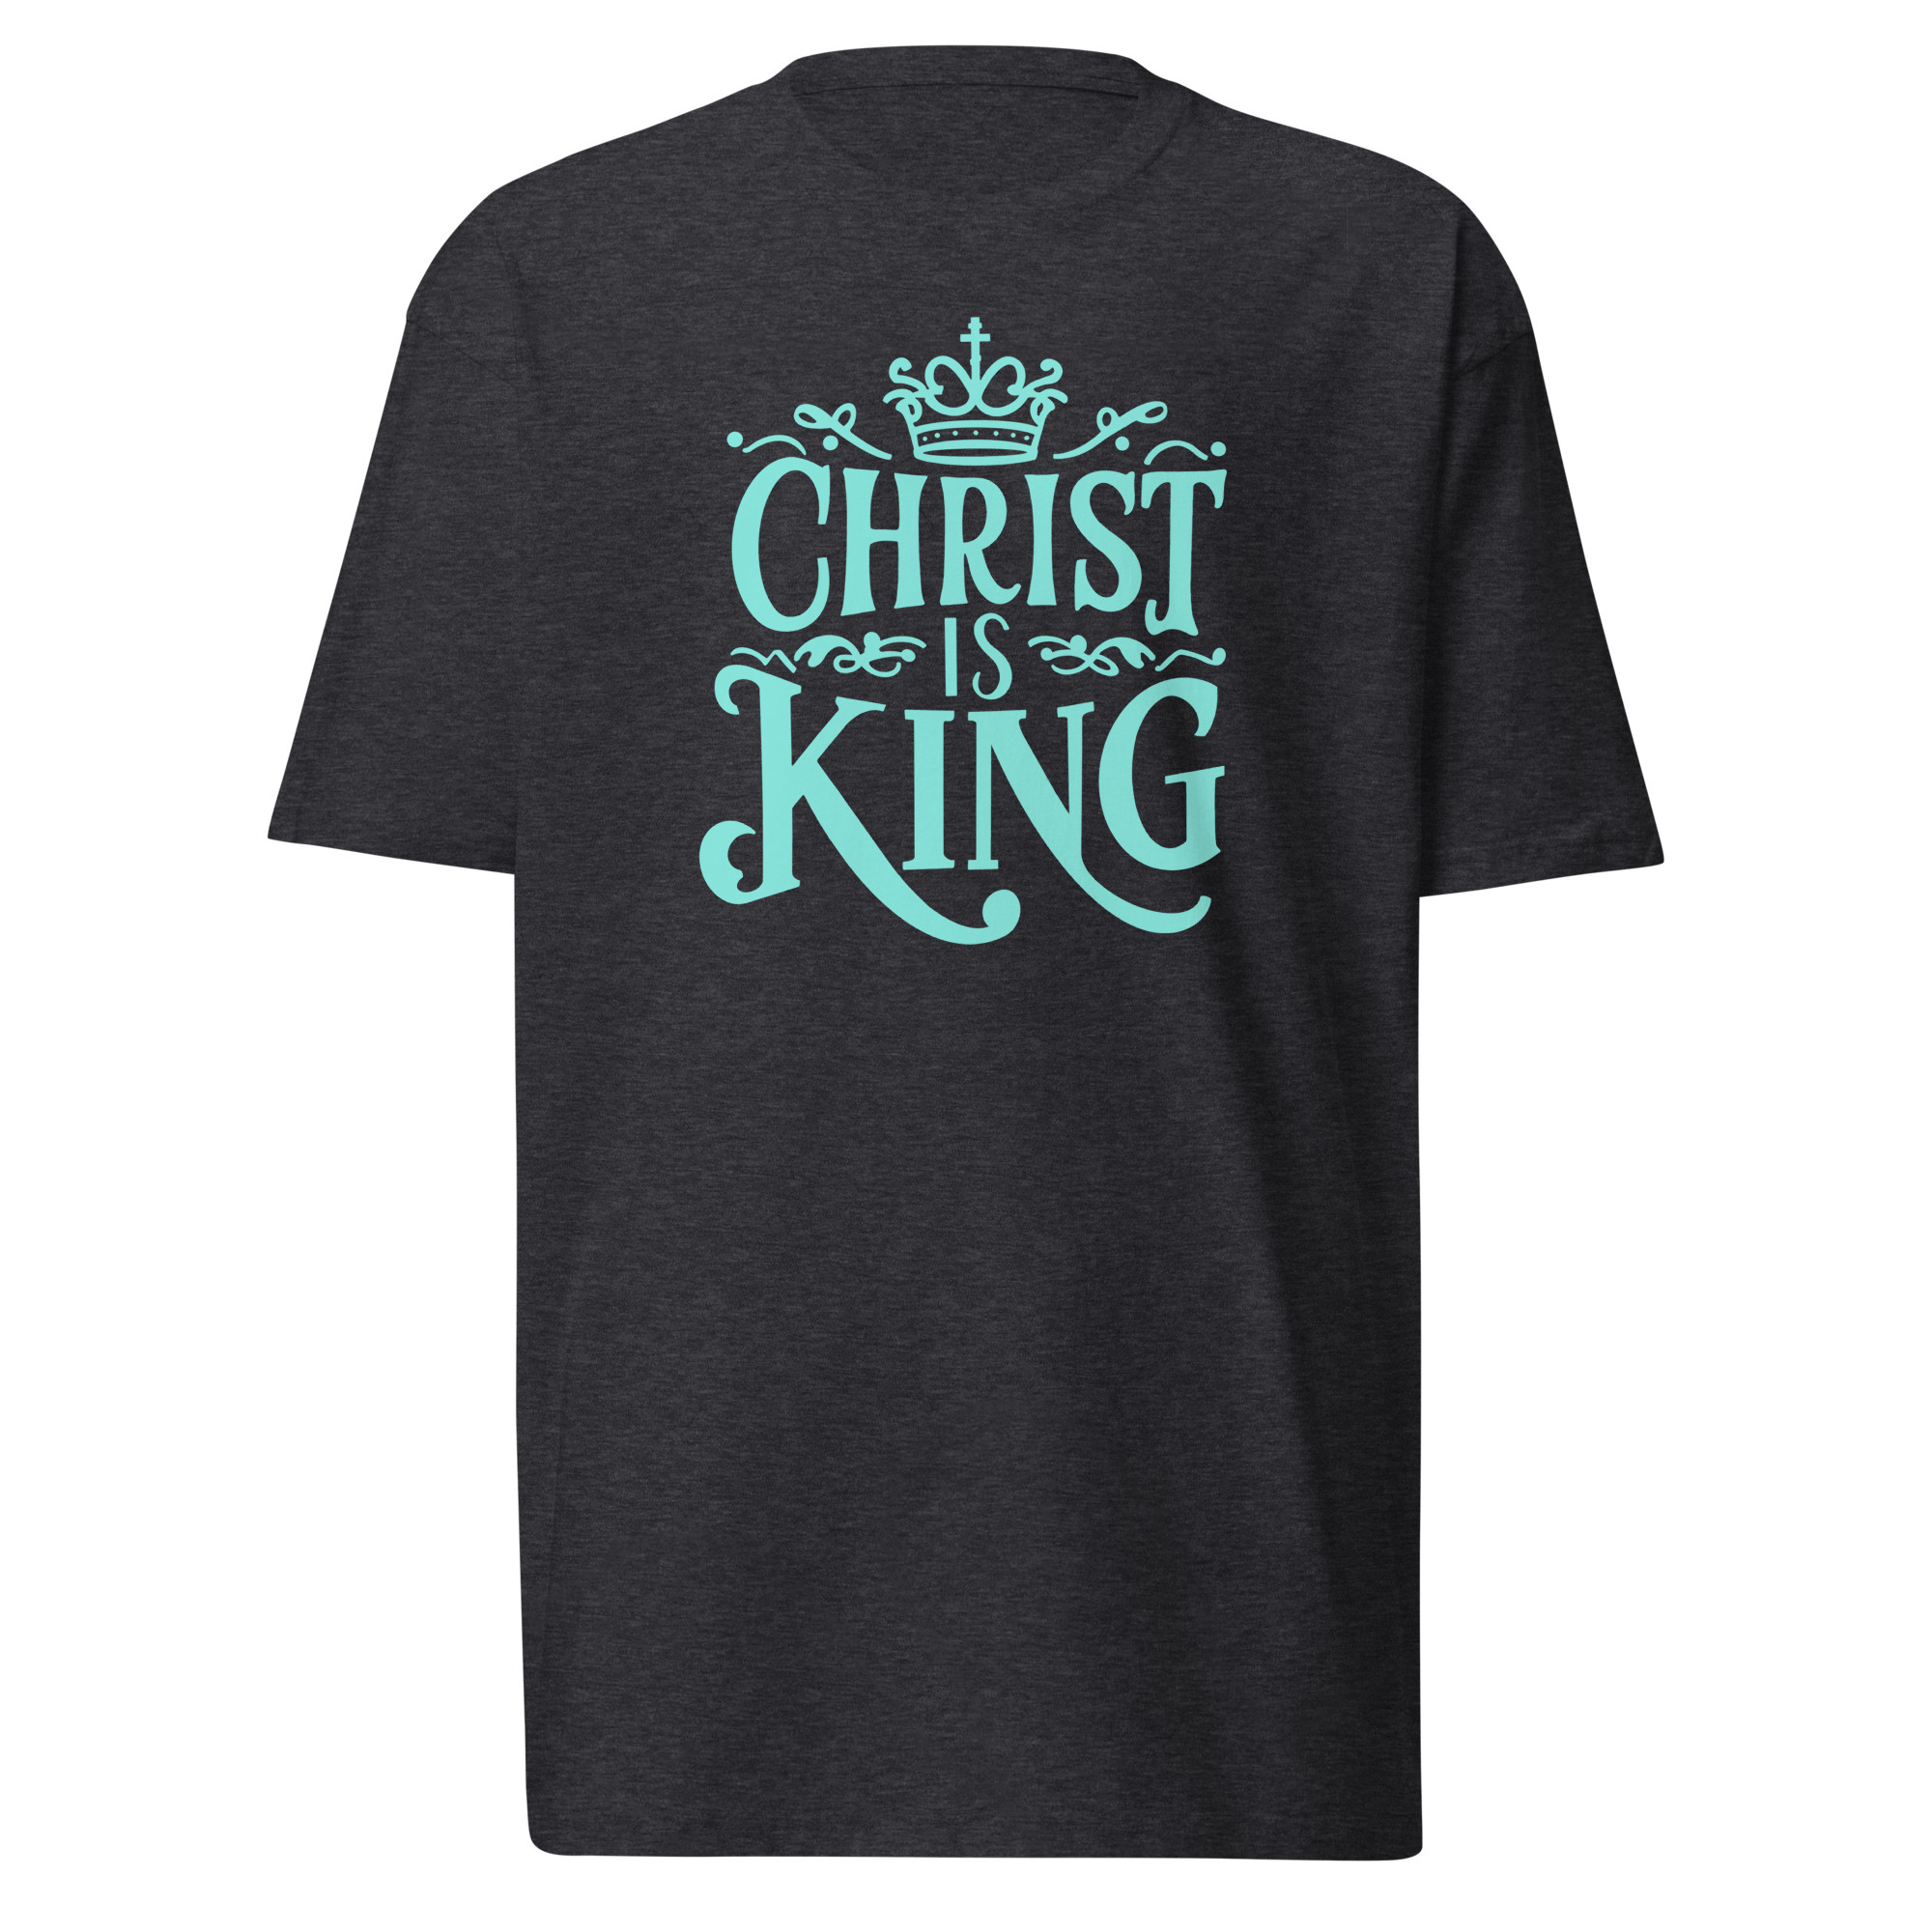 Christ is King 2.0 T-Shirt - Charcoal Heather / S